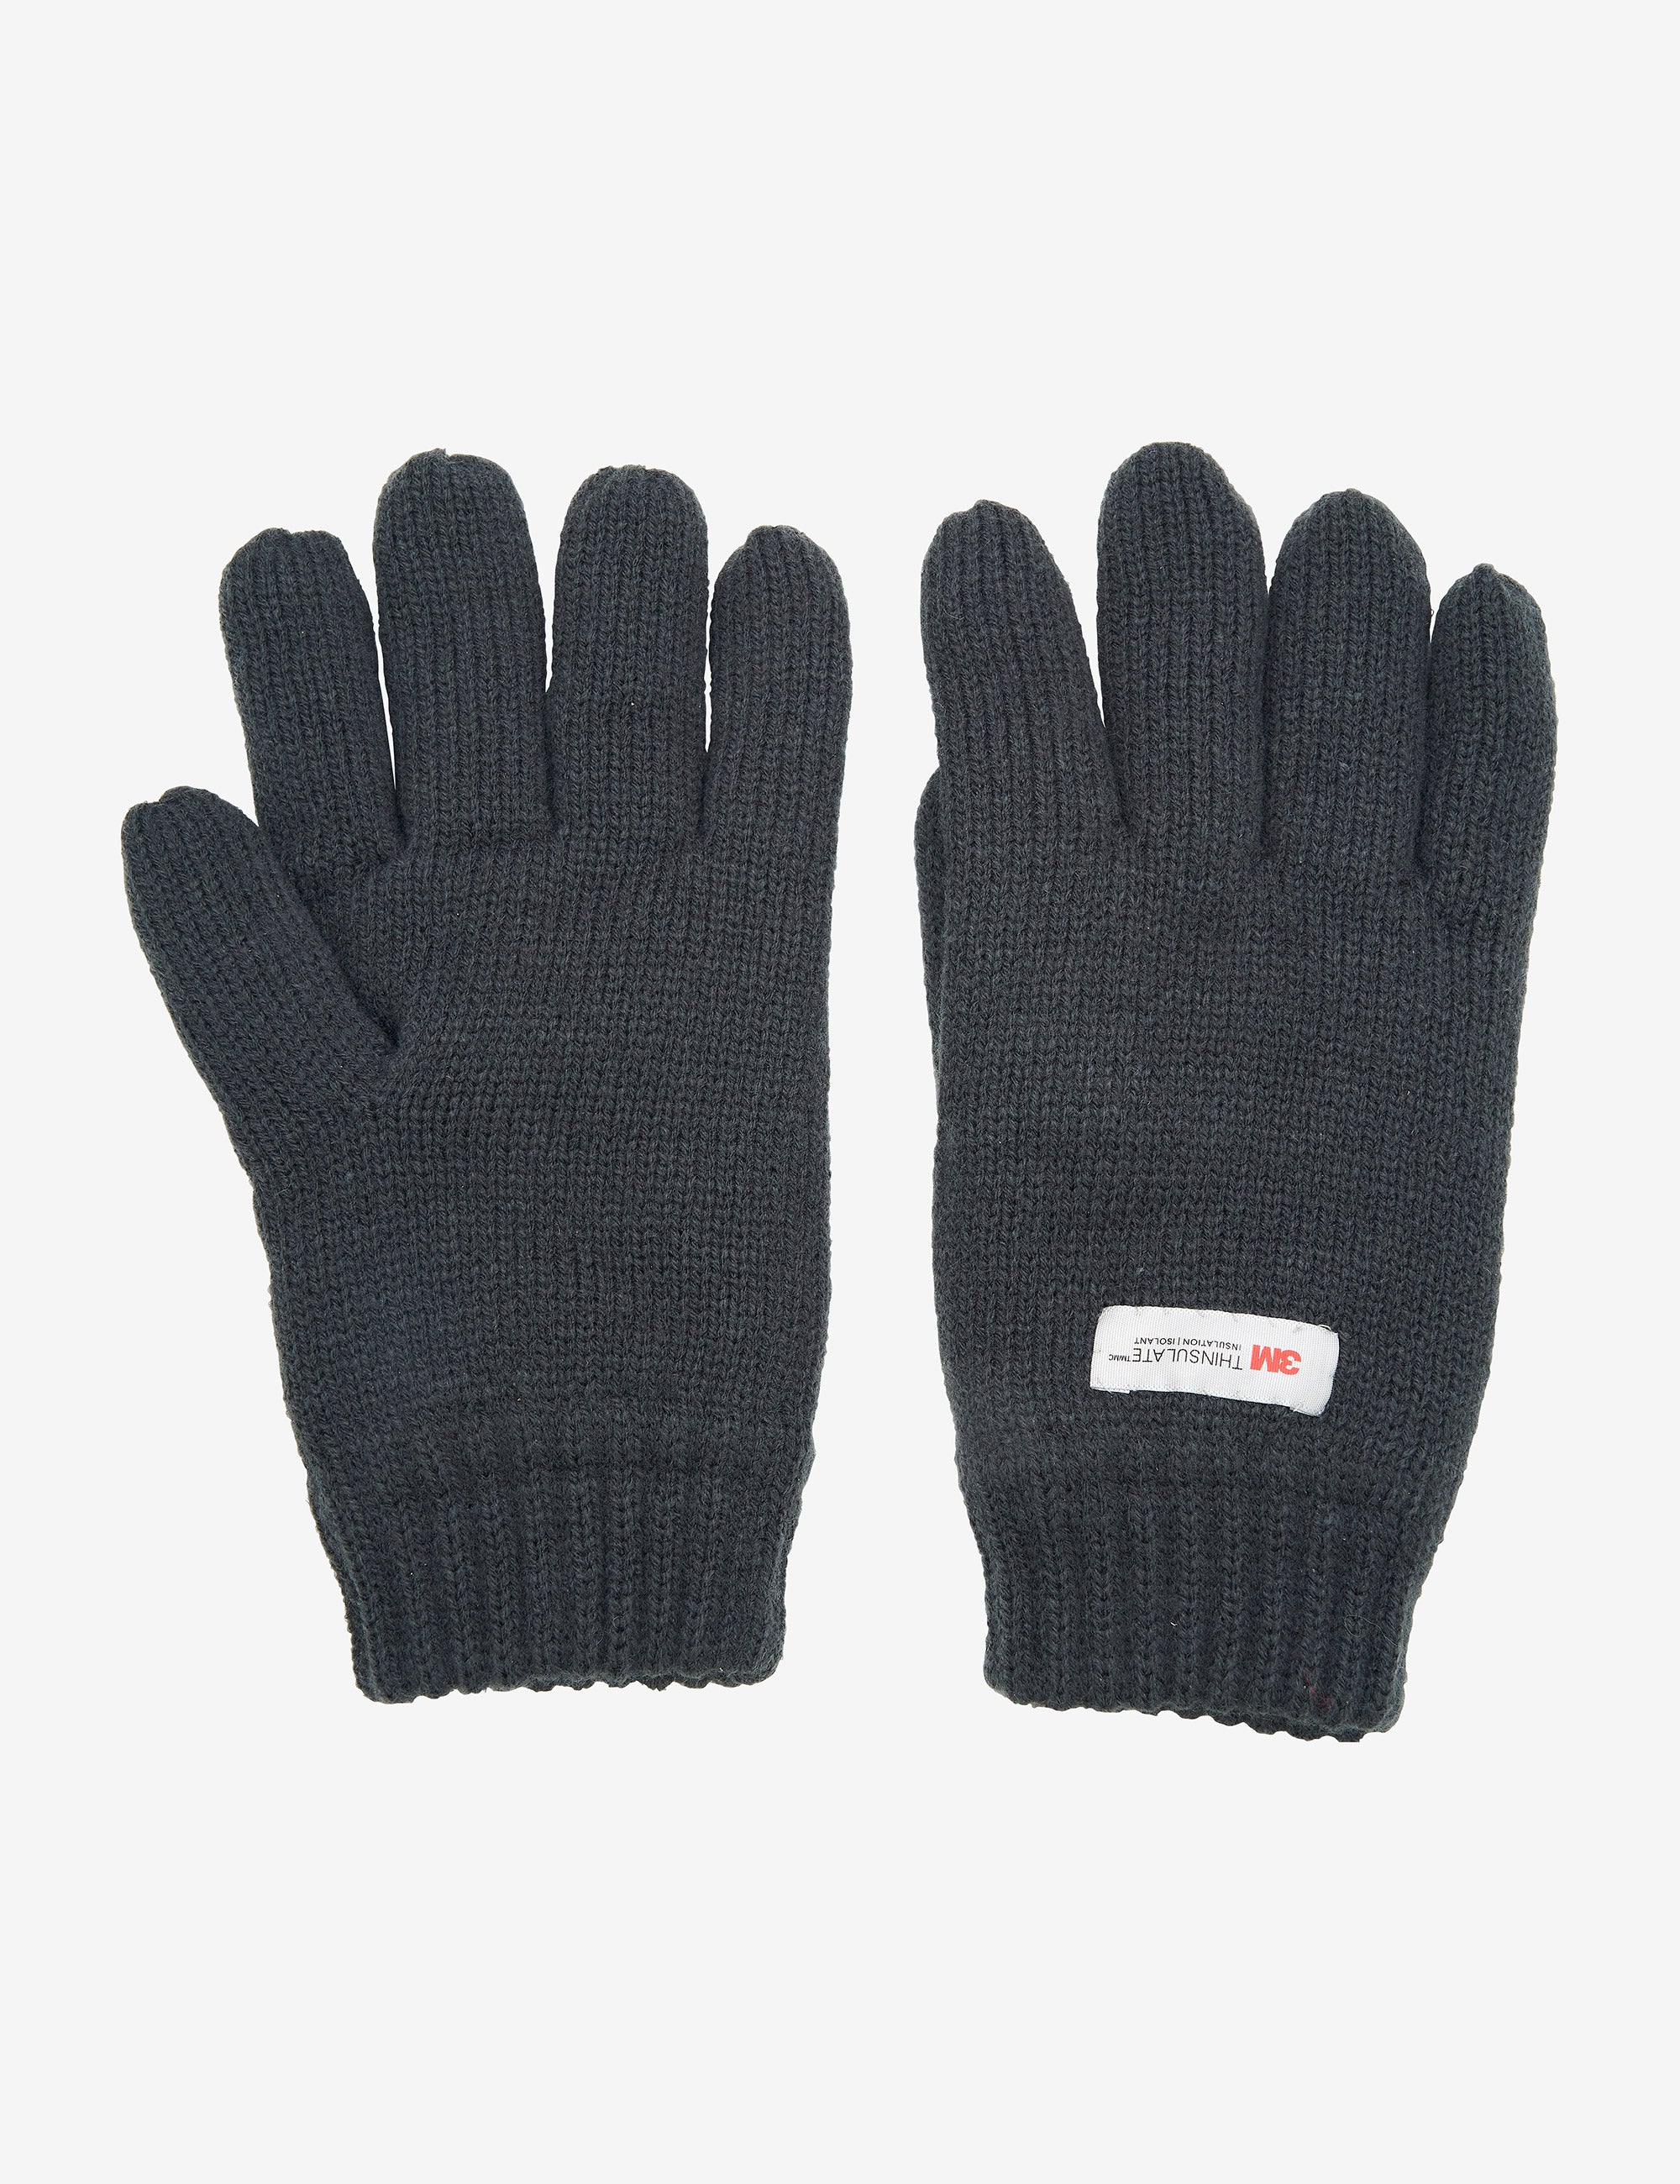 Rivers Thinsulate Gloves | Rivers Australia